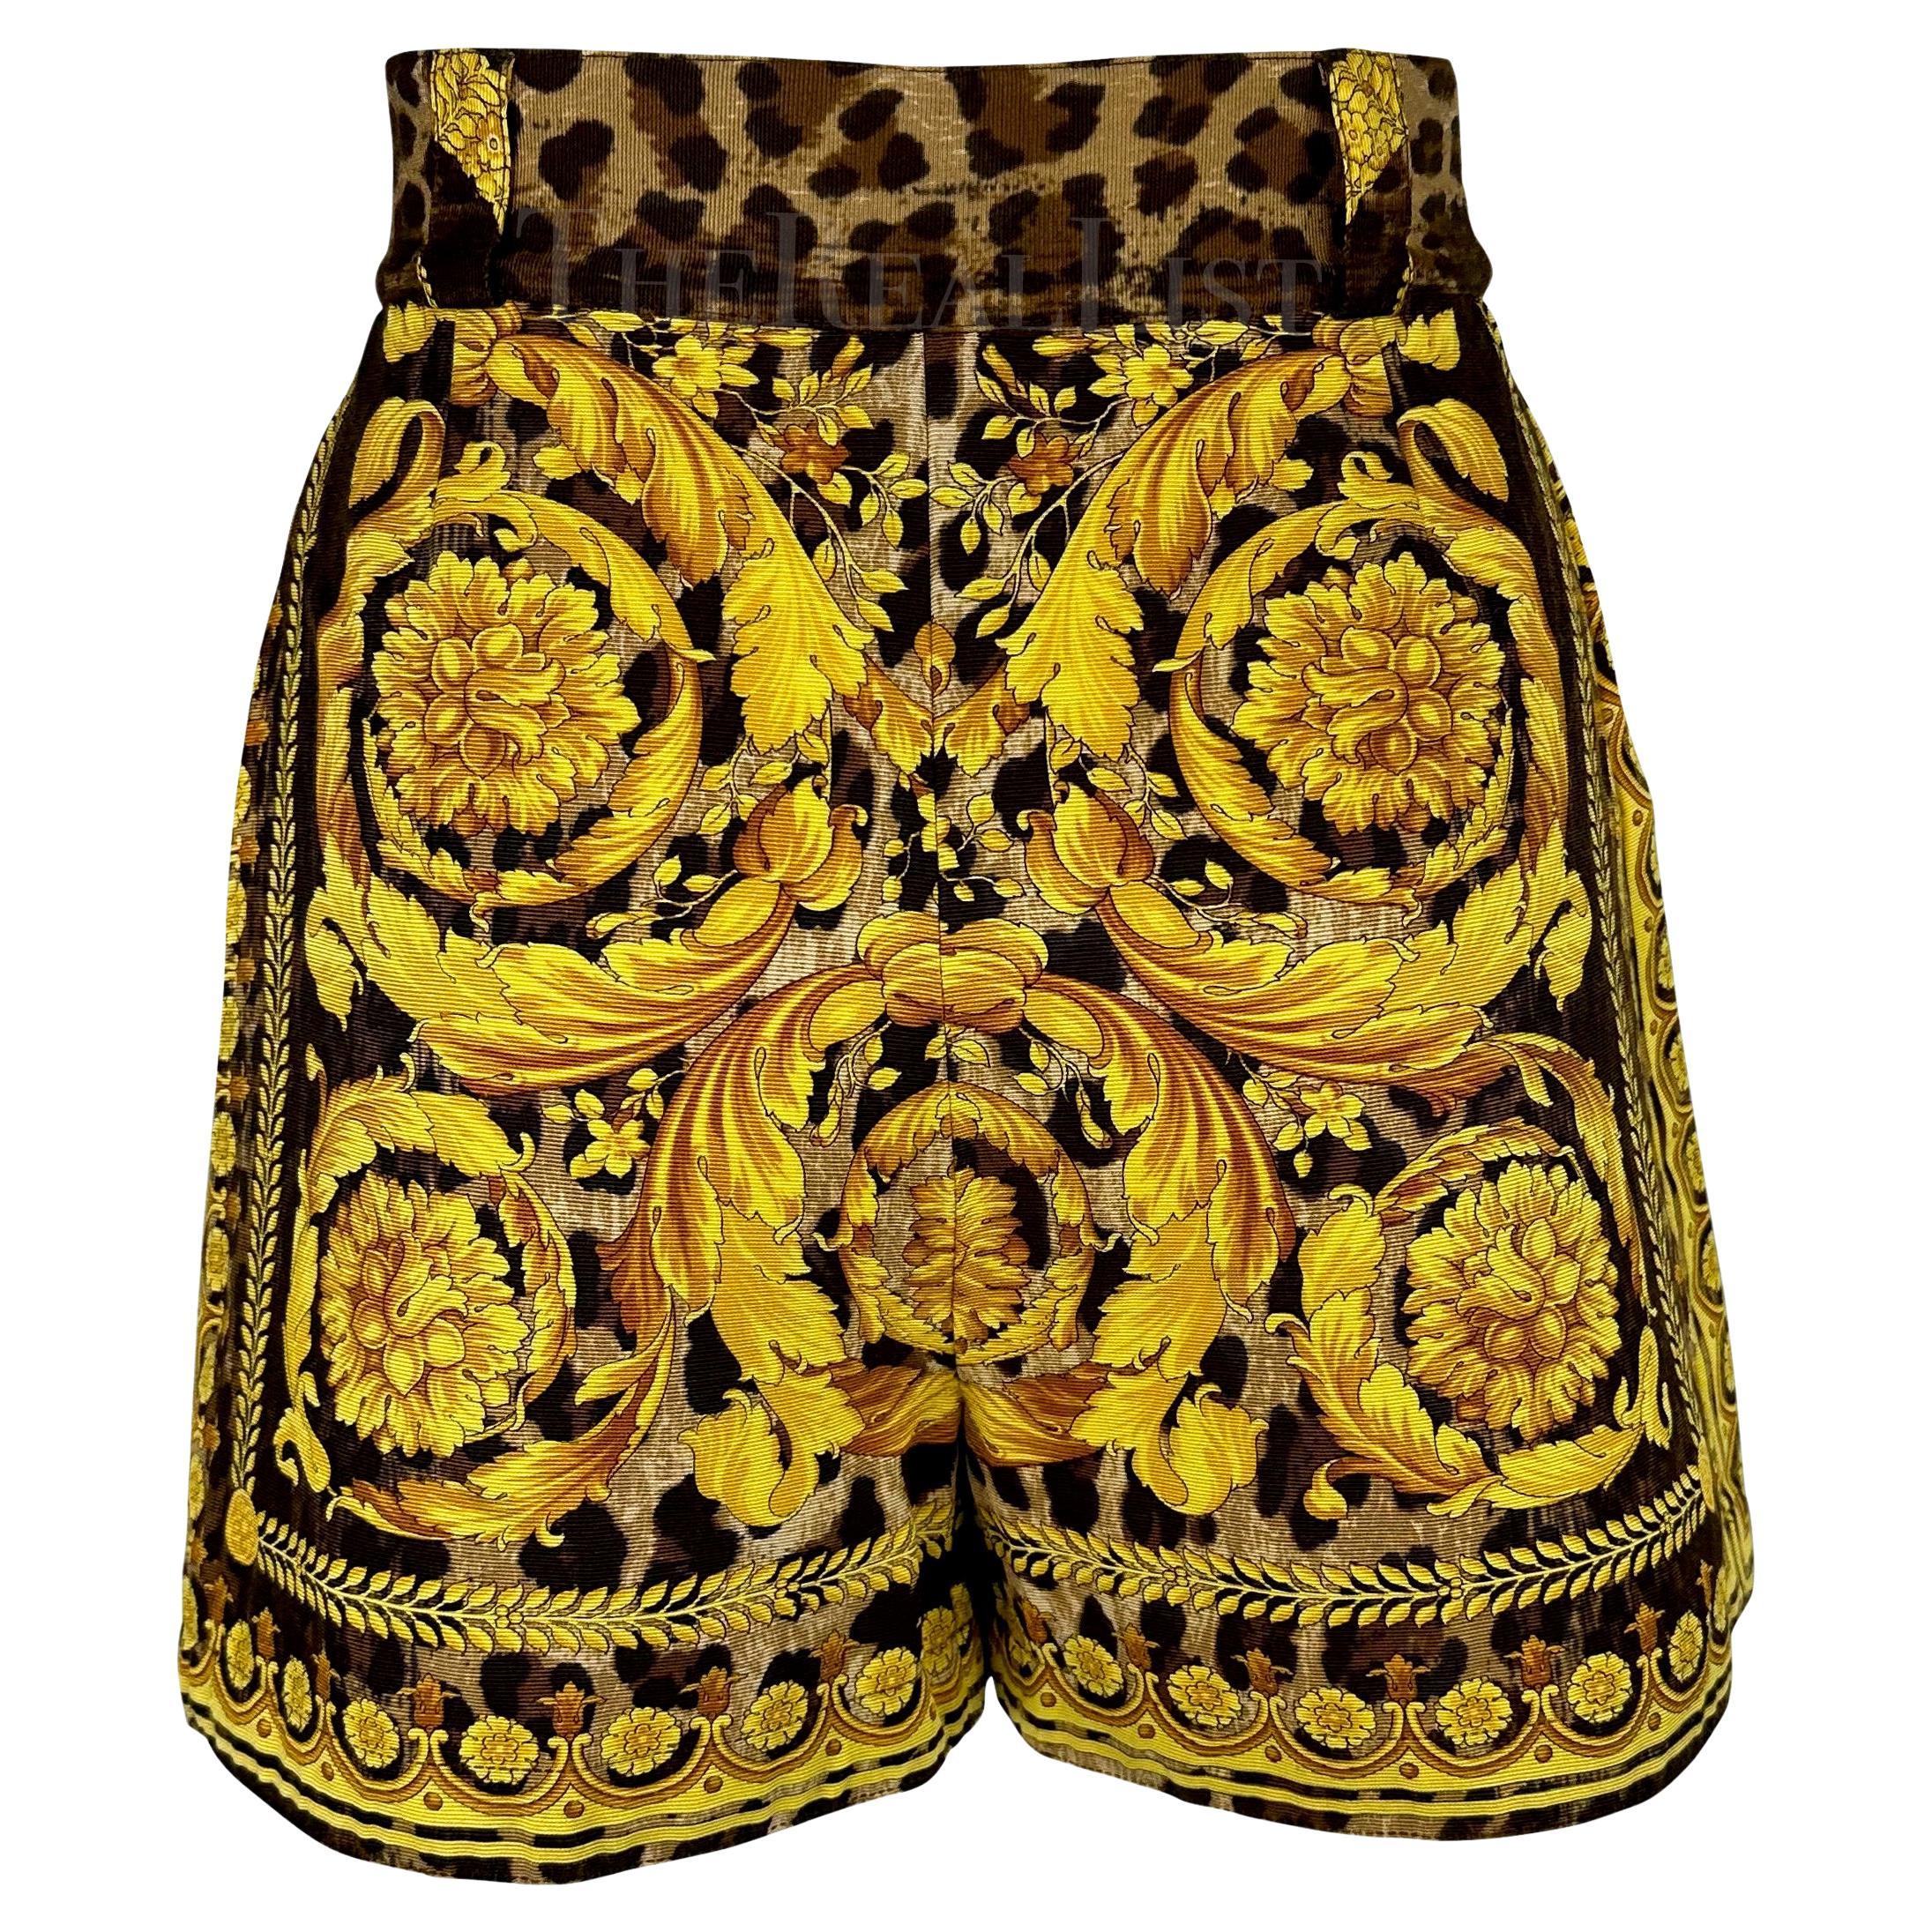 S/S 1992 Gianni Versace Runway Gold Baroque Leopard Print High Waisted Shorts For Sale 1